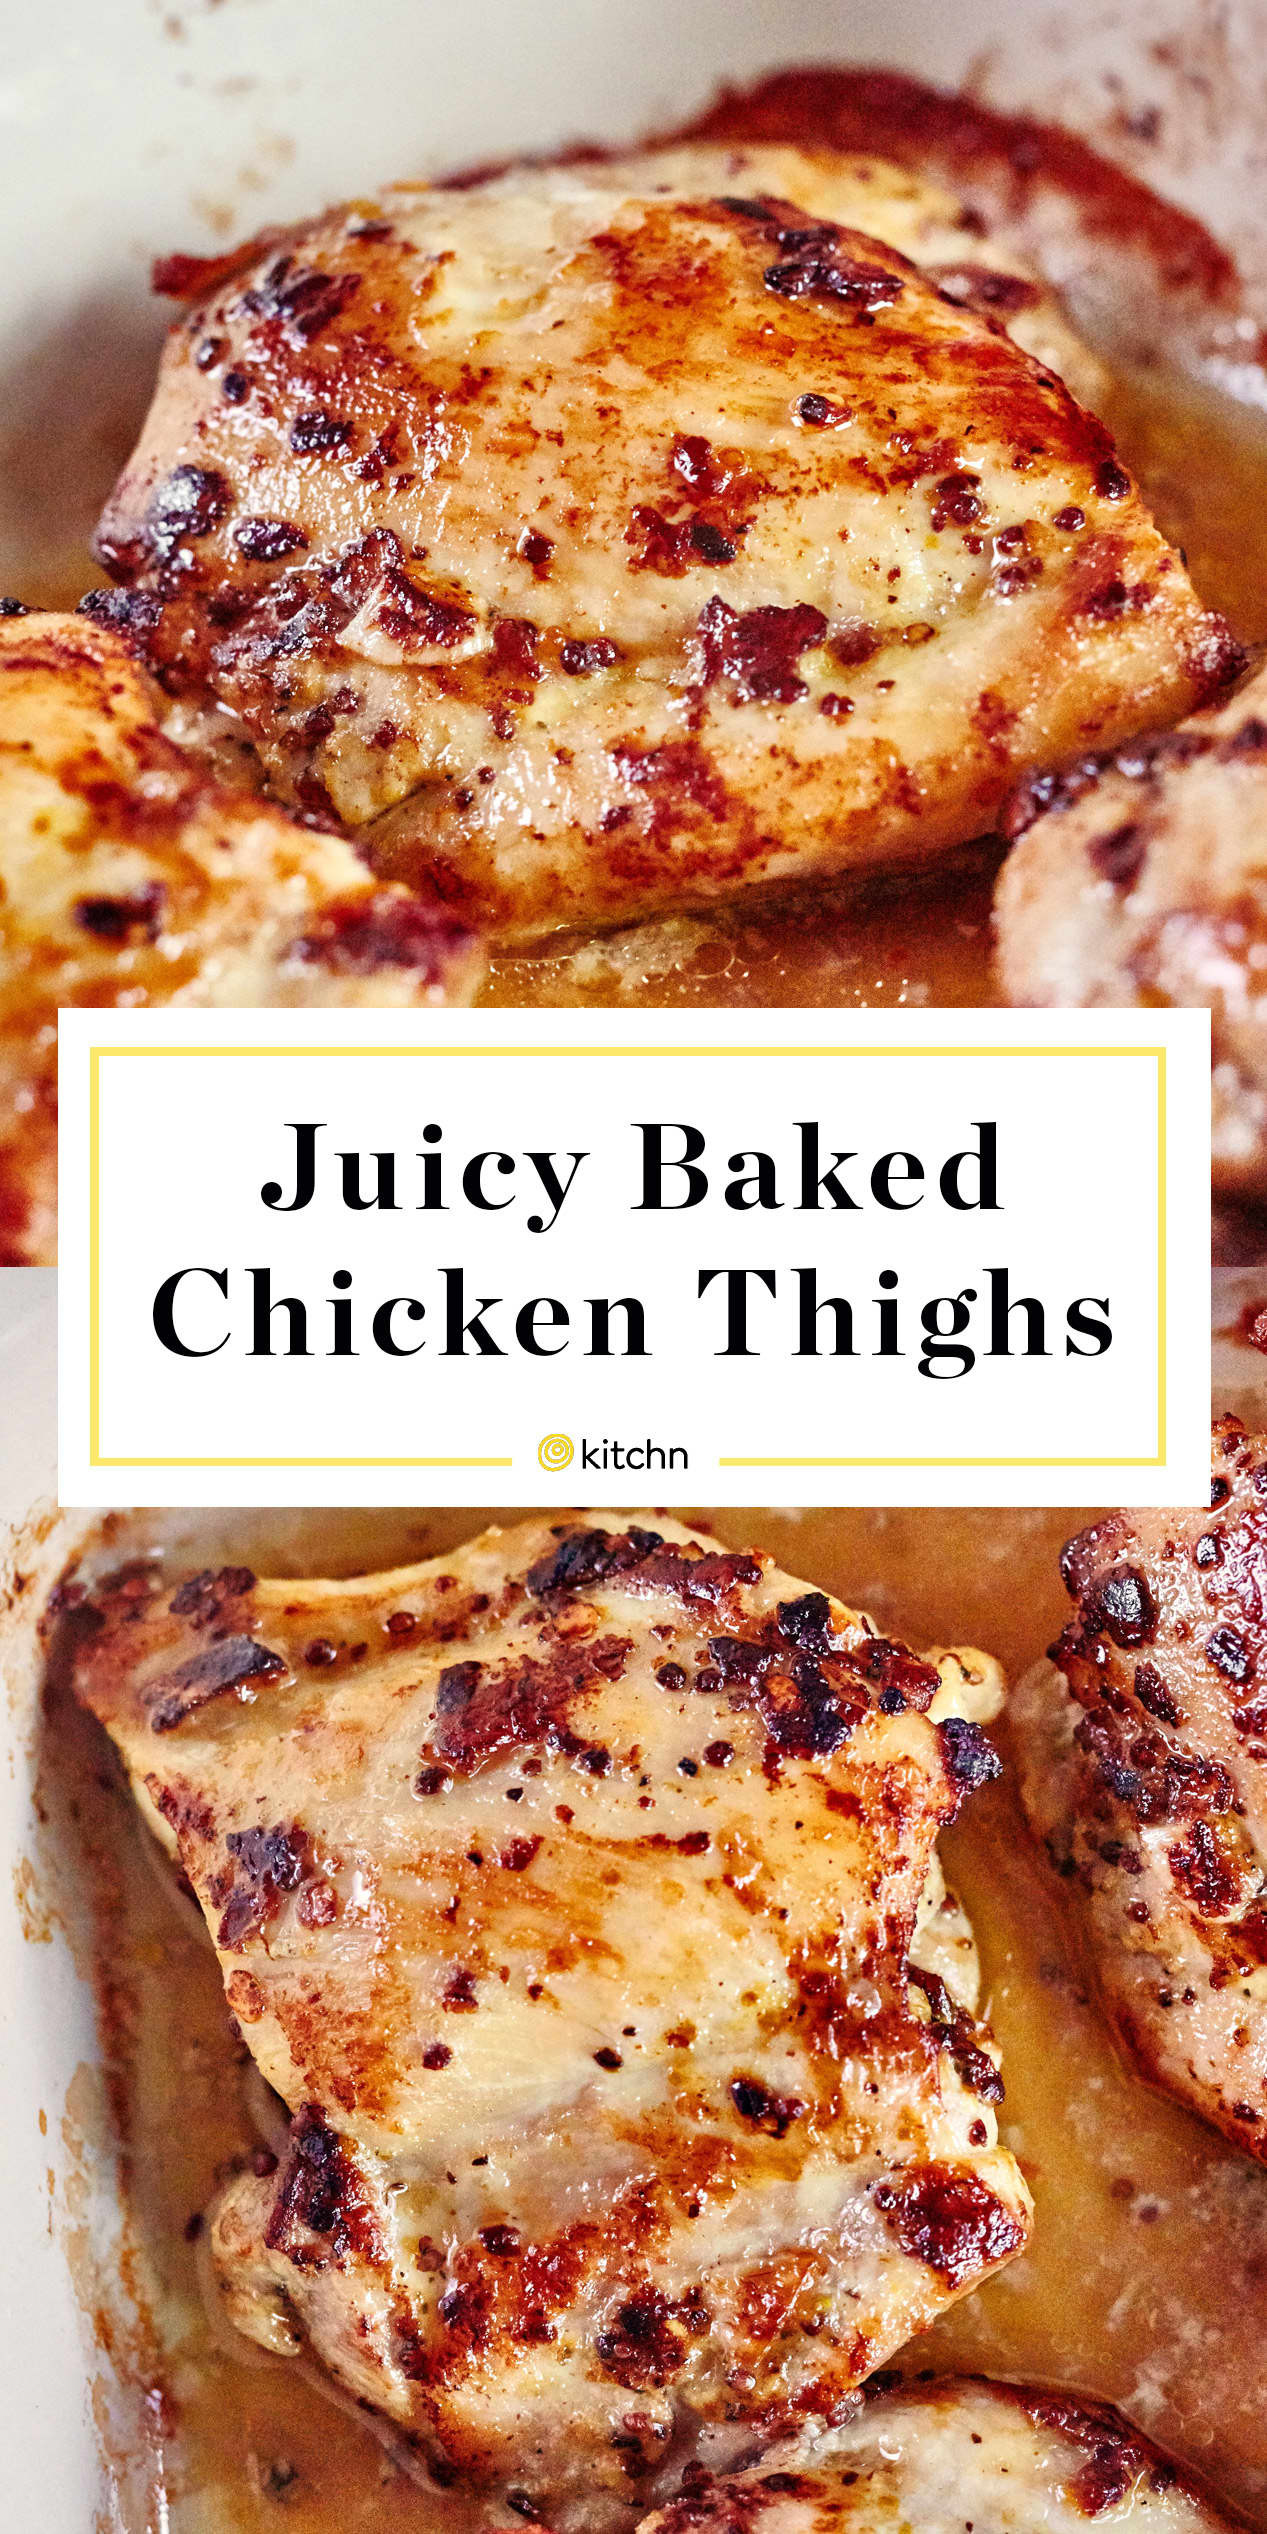 Microwaved Chicken Thighs
 How To Cook Boneless Skinless Chicken Thighs in the Oven